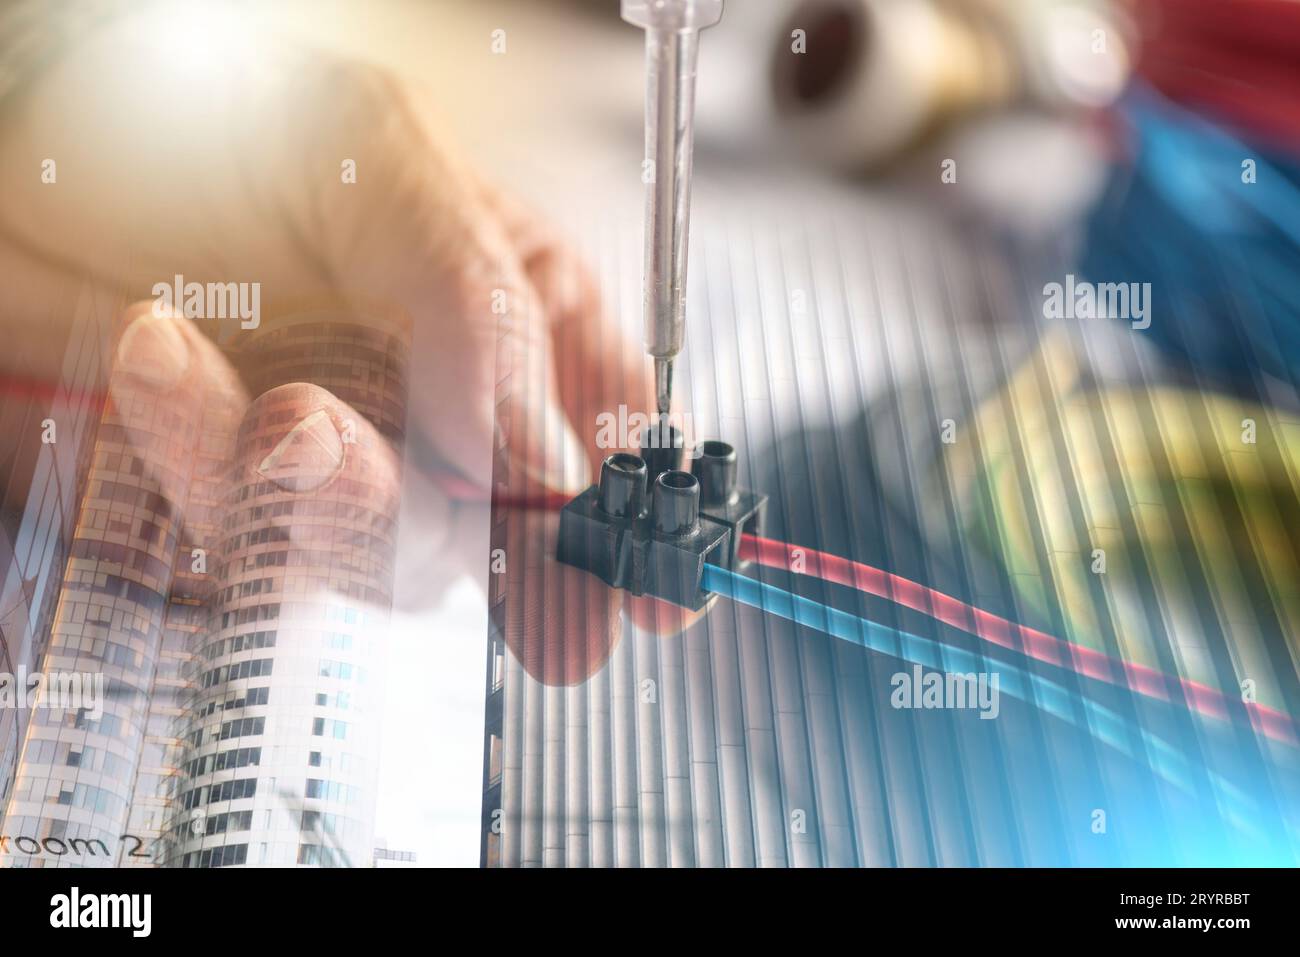 Electrician hands connecting wires in terminal block; multiple exposure Stock Photo